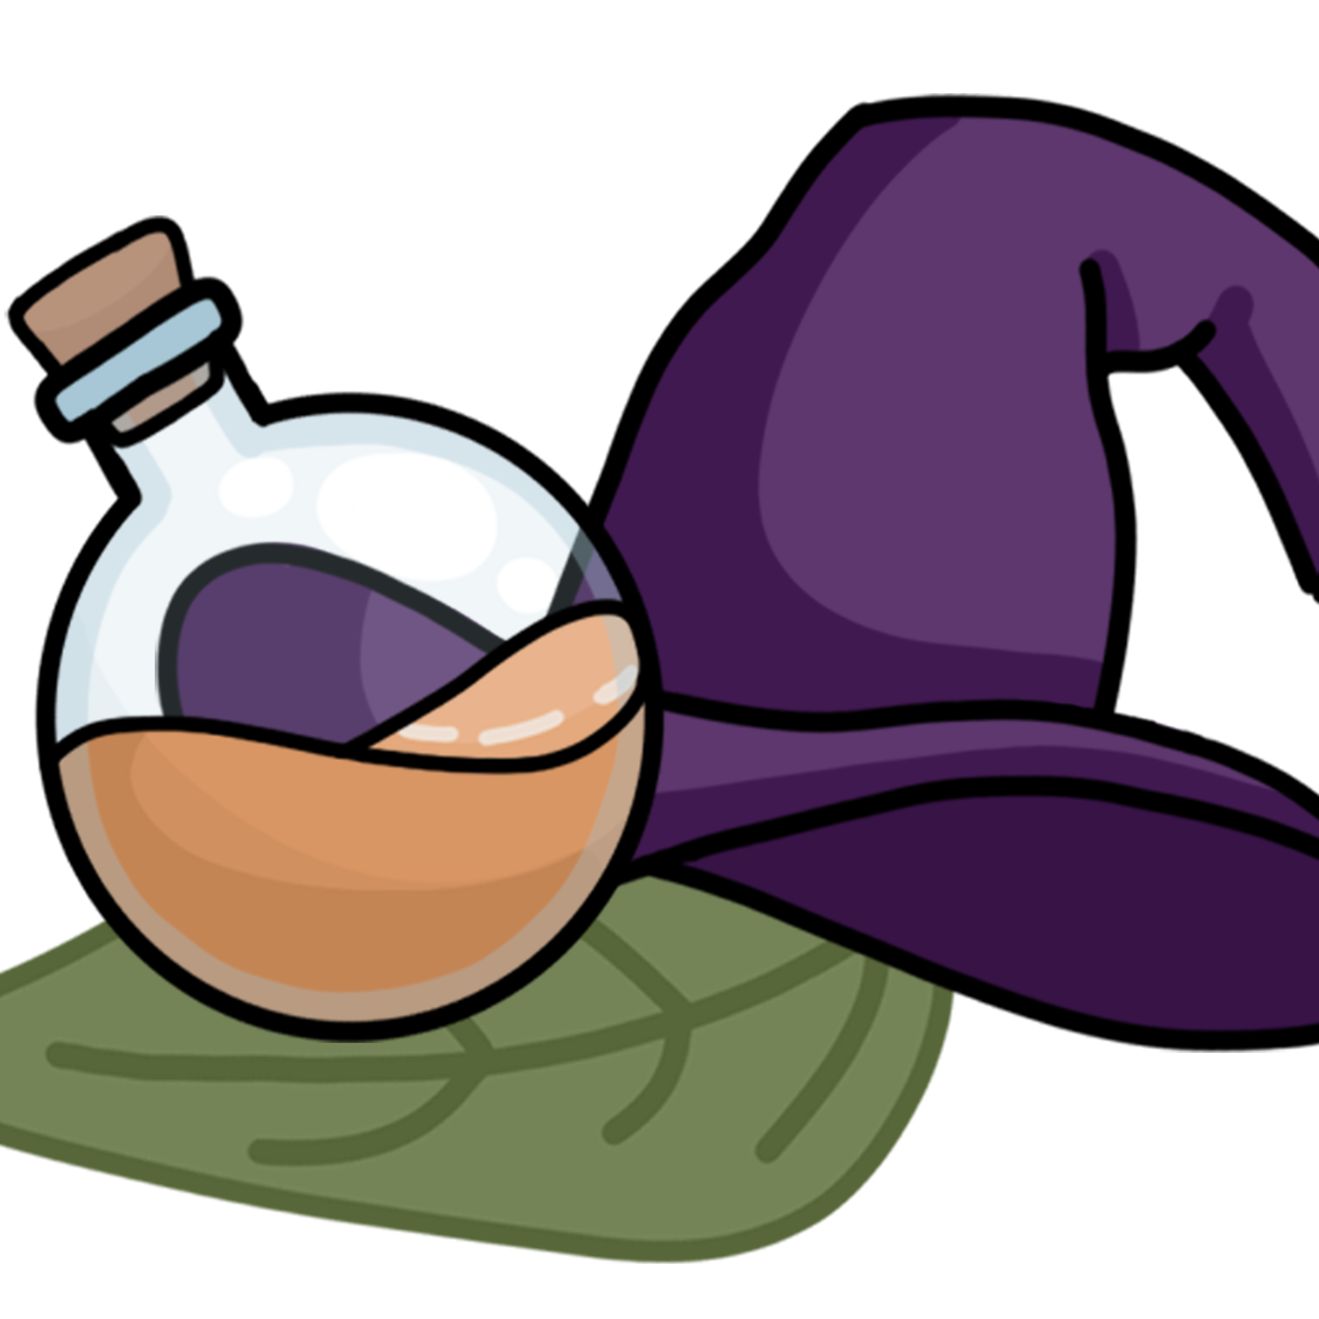 logo of a witch hat, leaf, and potion